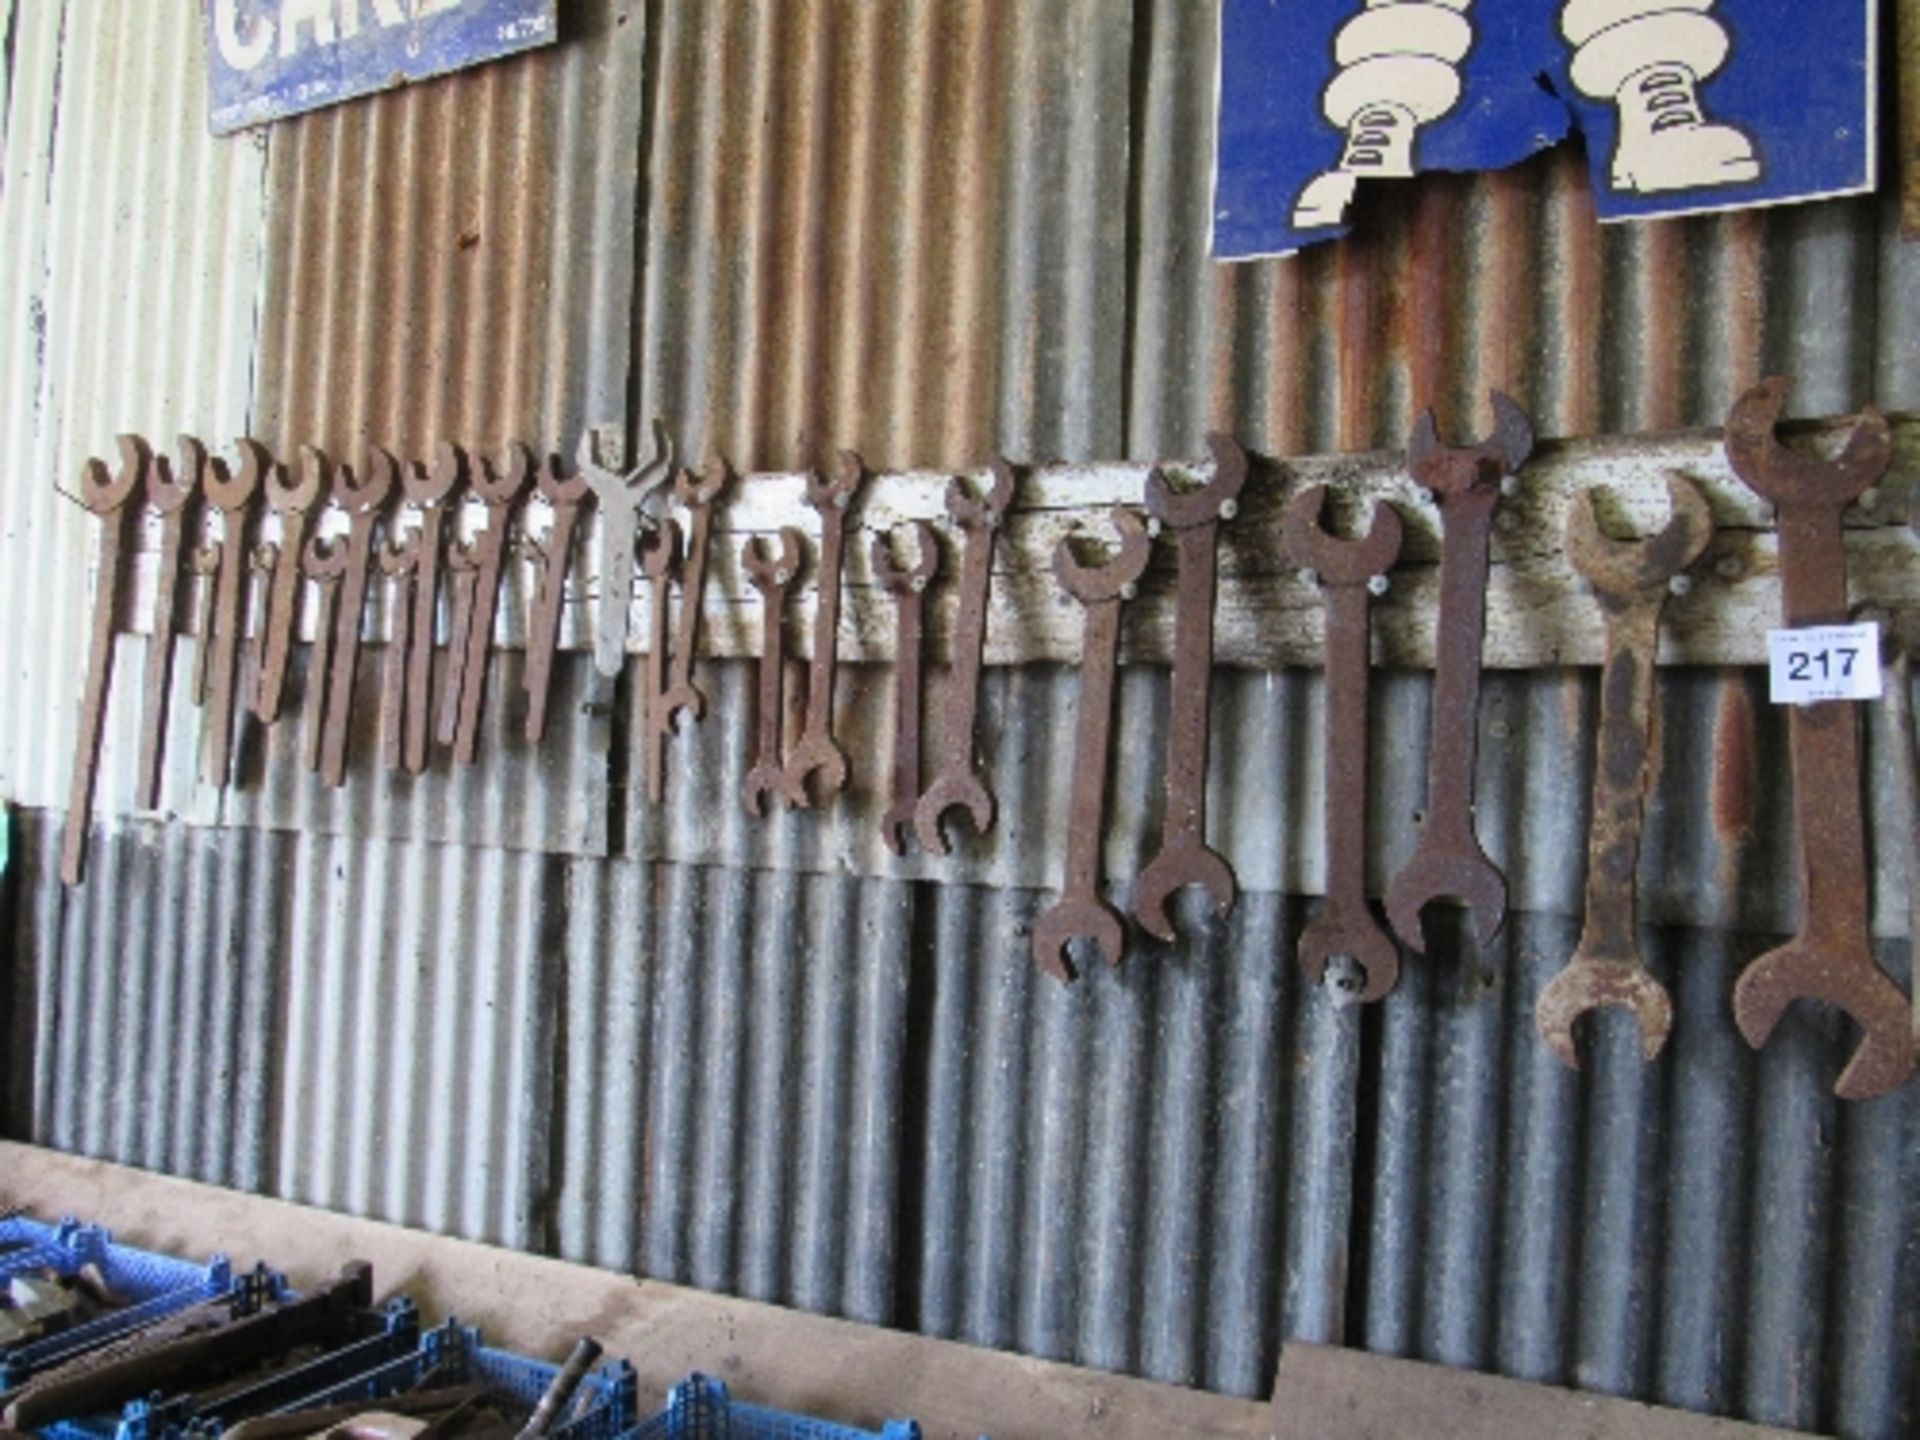 Various Whitworth spanners to include King Dick, Snailbrand - approx 50 and six tap keys